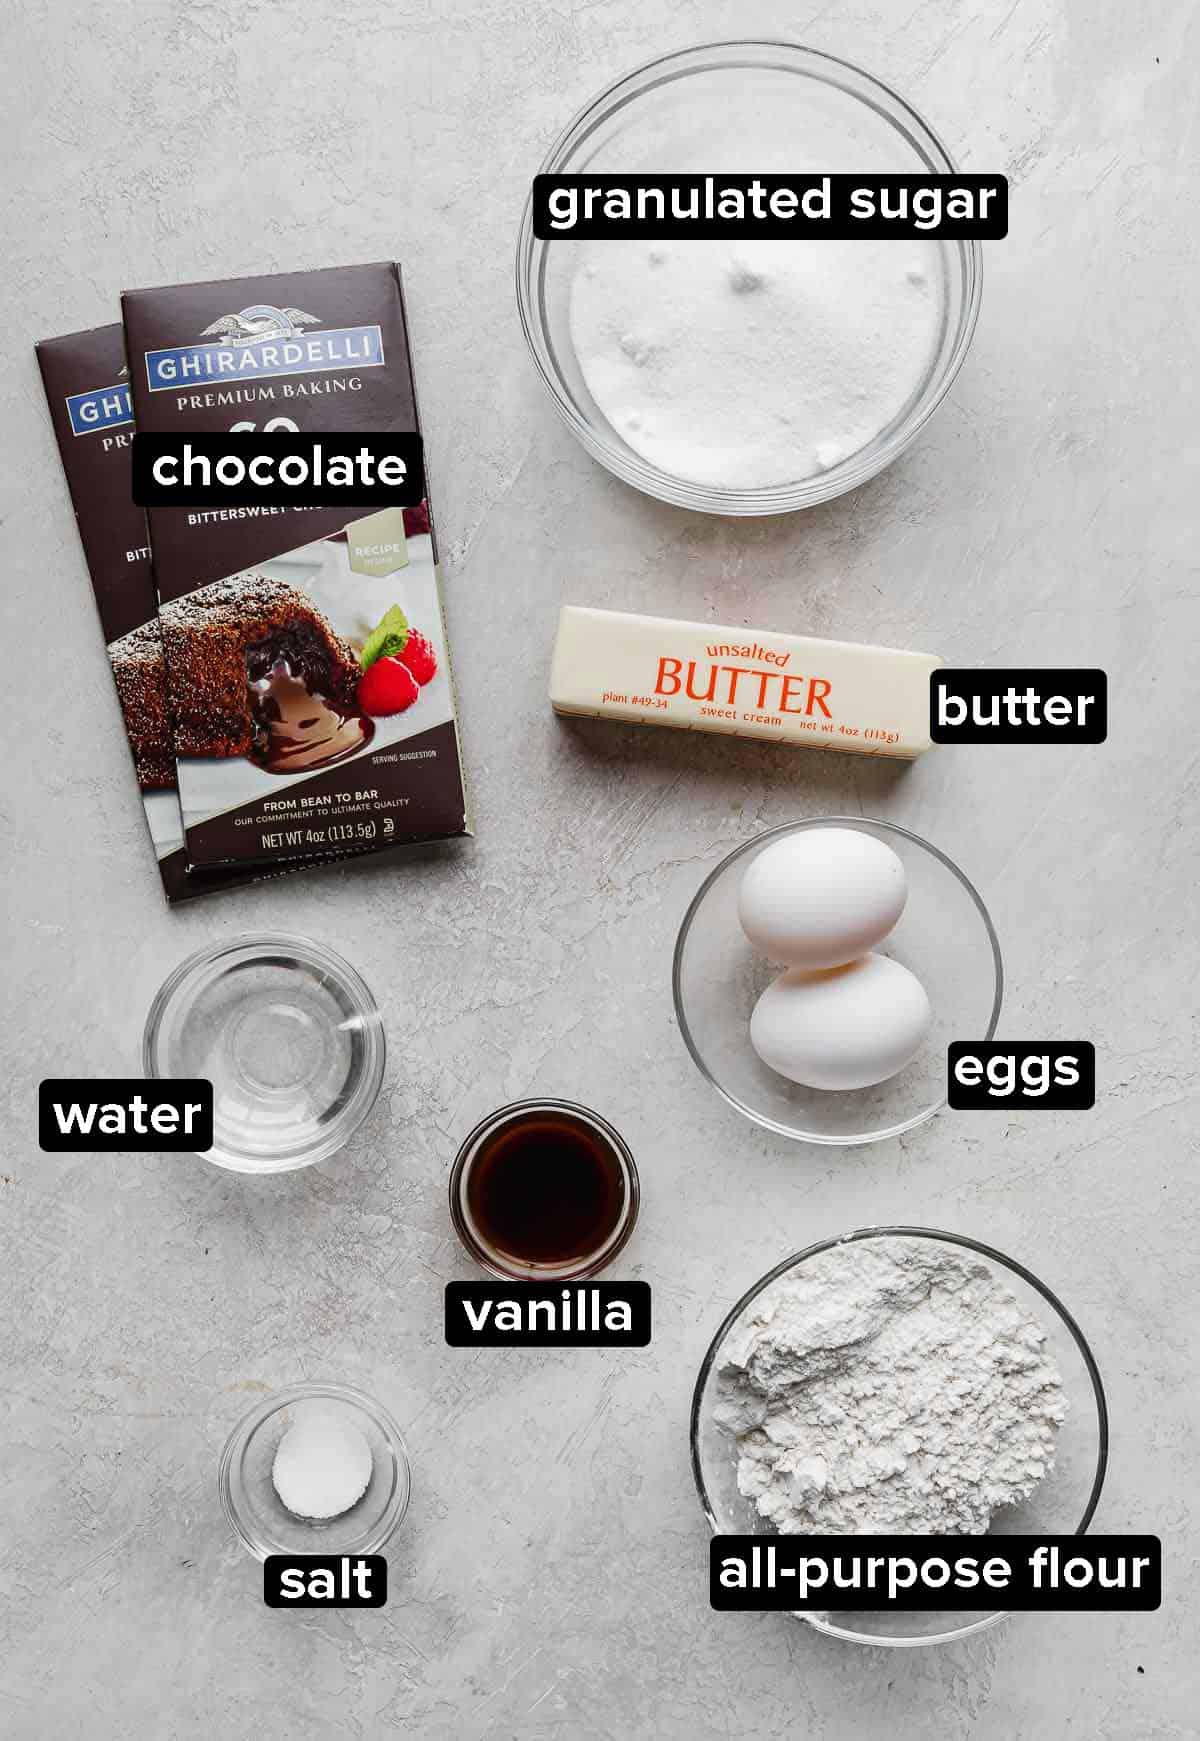 German Chocolate Brownie ingredients: sugar, eggs, butter, flour, vanilla, water, and chocolate bar, on a gray background.